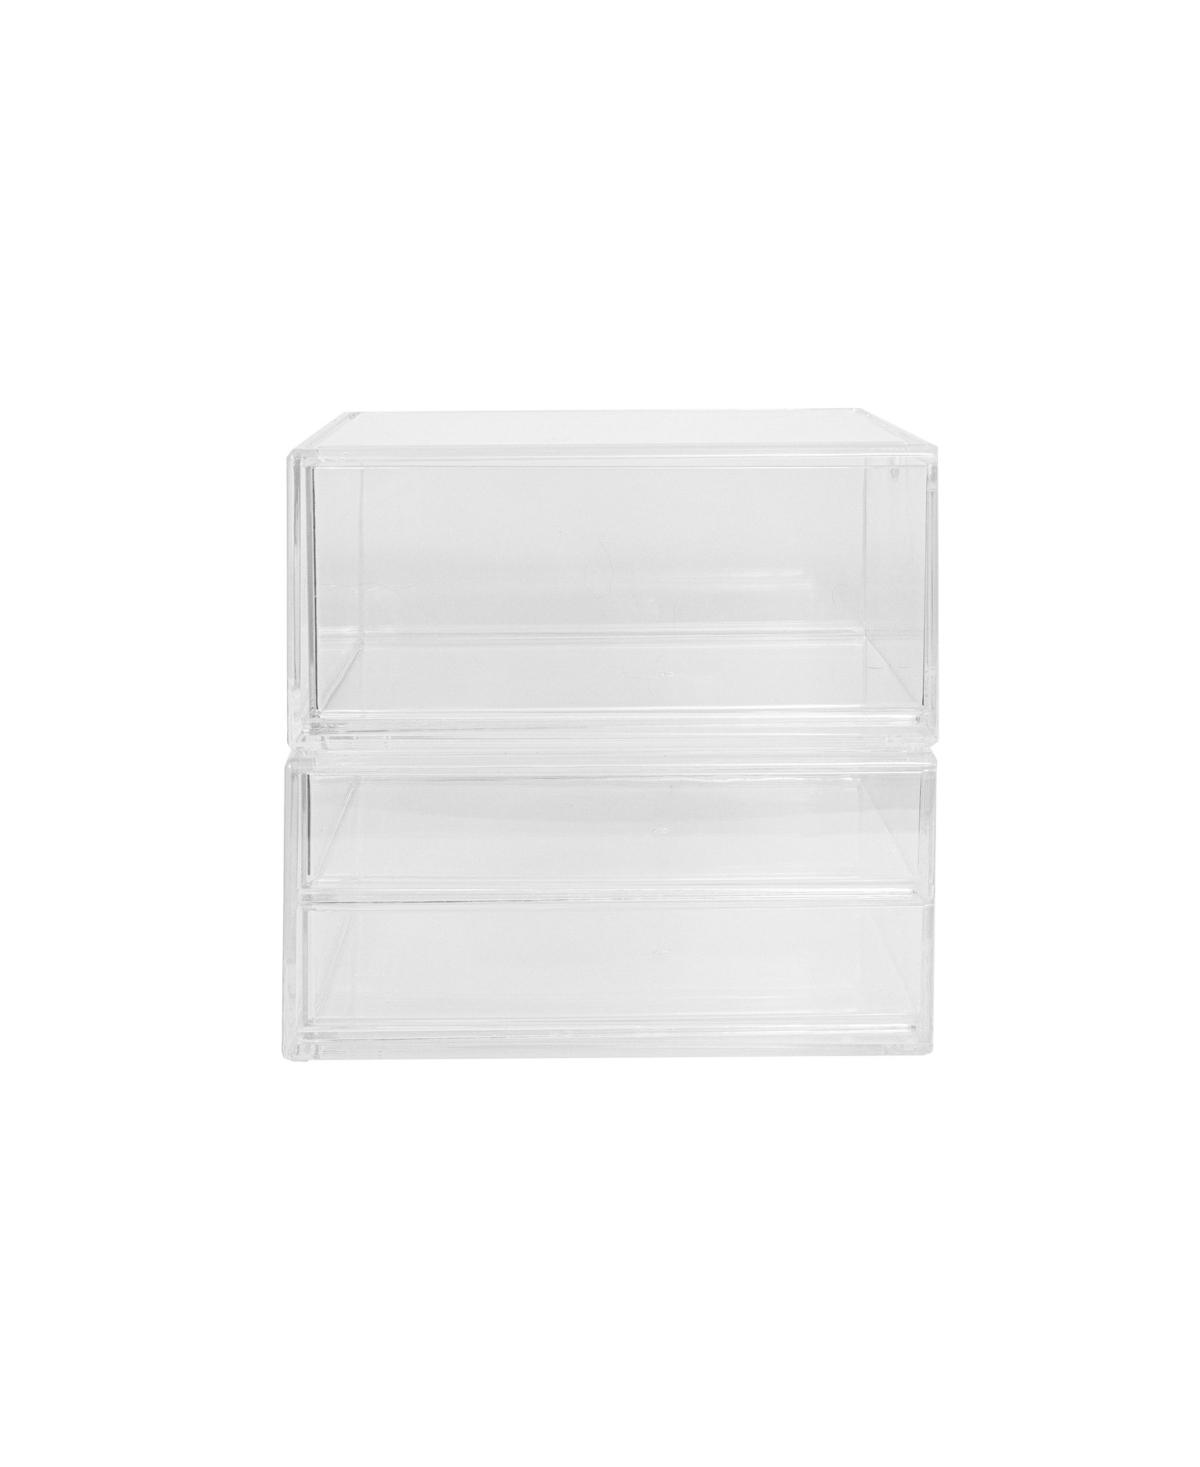 Brody Set of 2 Plastic Stackable Office Desktop Organizer Boxes, Single Drawer and 2 Drawers, 6" x 7.5" - Clear